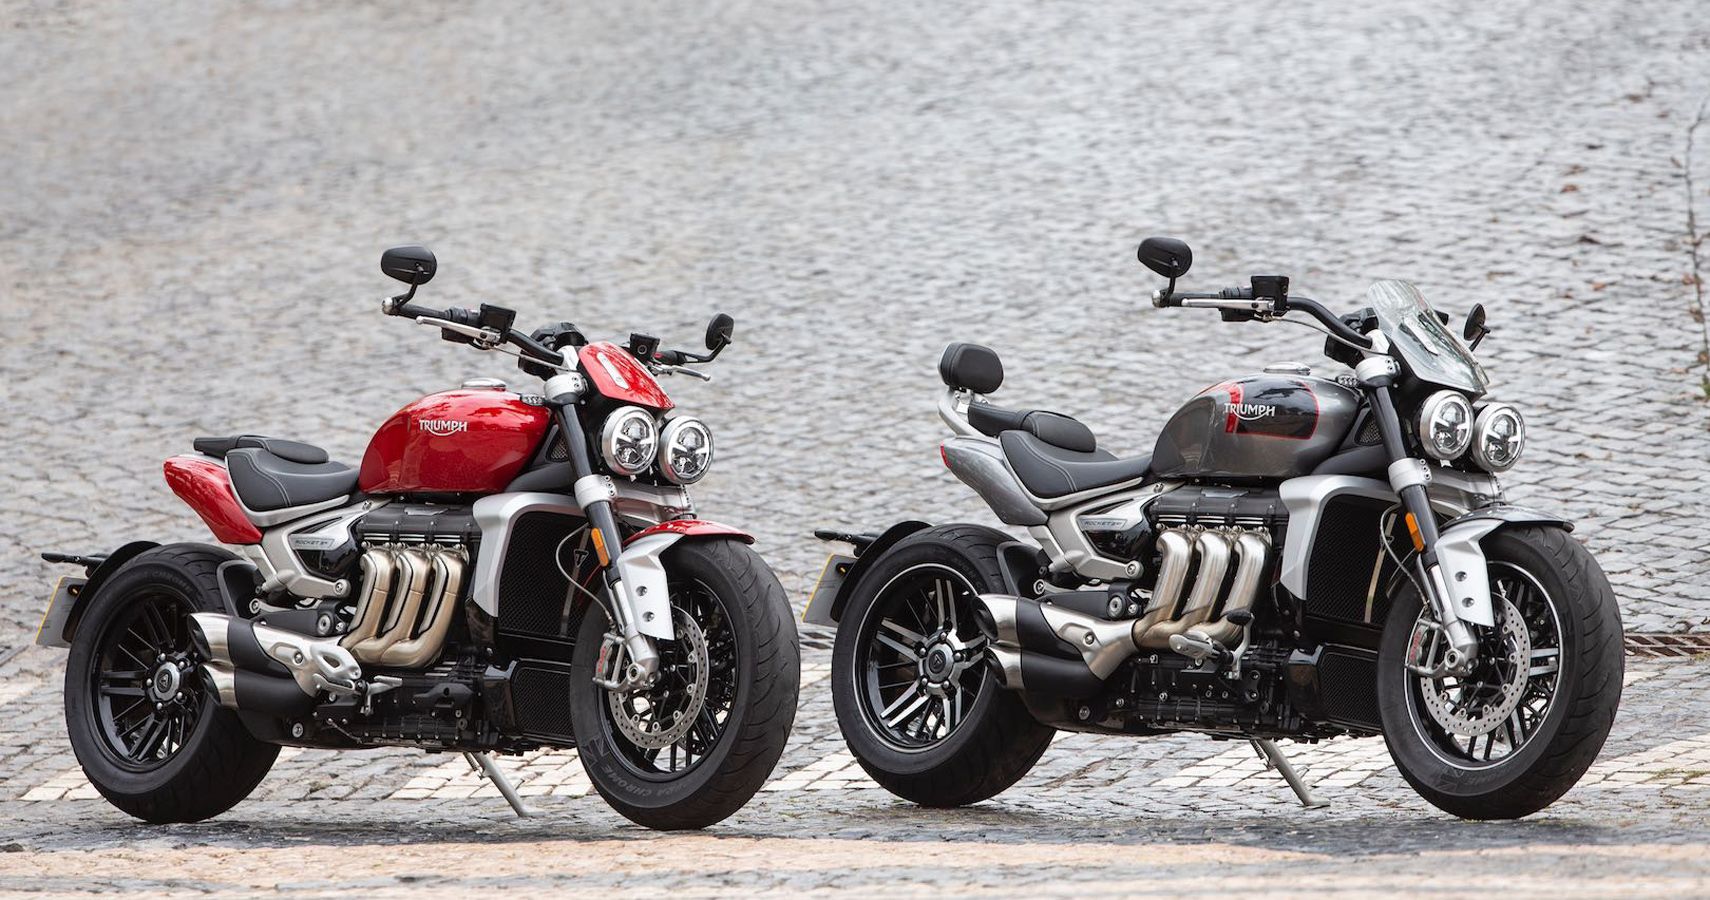 The Triumph Rocket 3 R Has A Sportier Handlebar While The GT Has A Touring-Style One